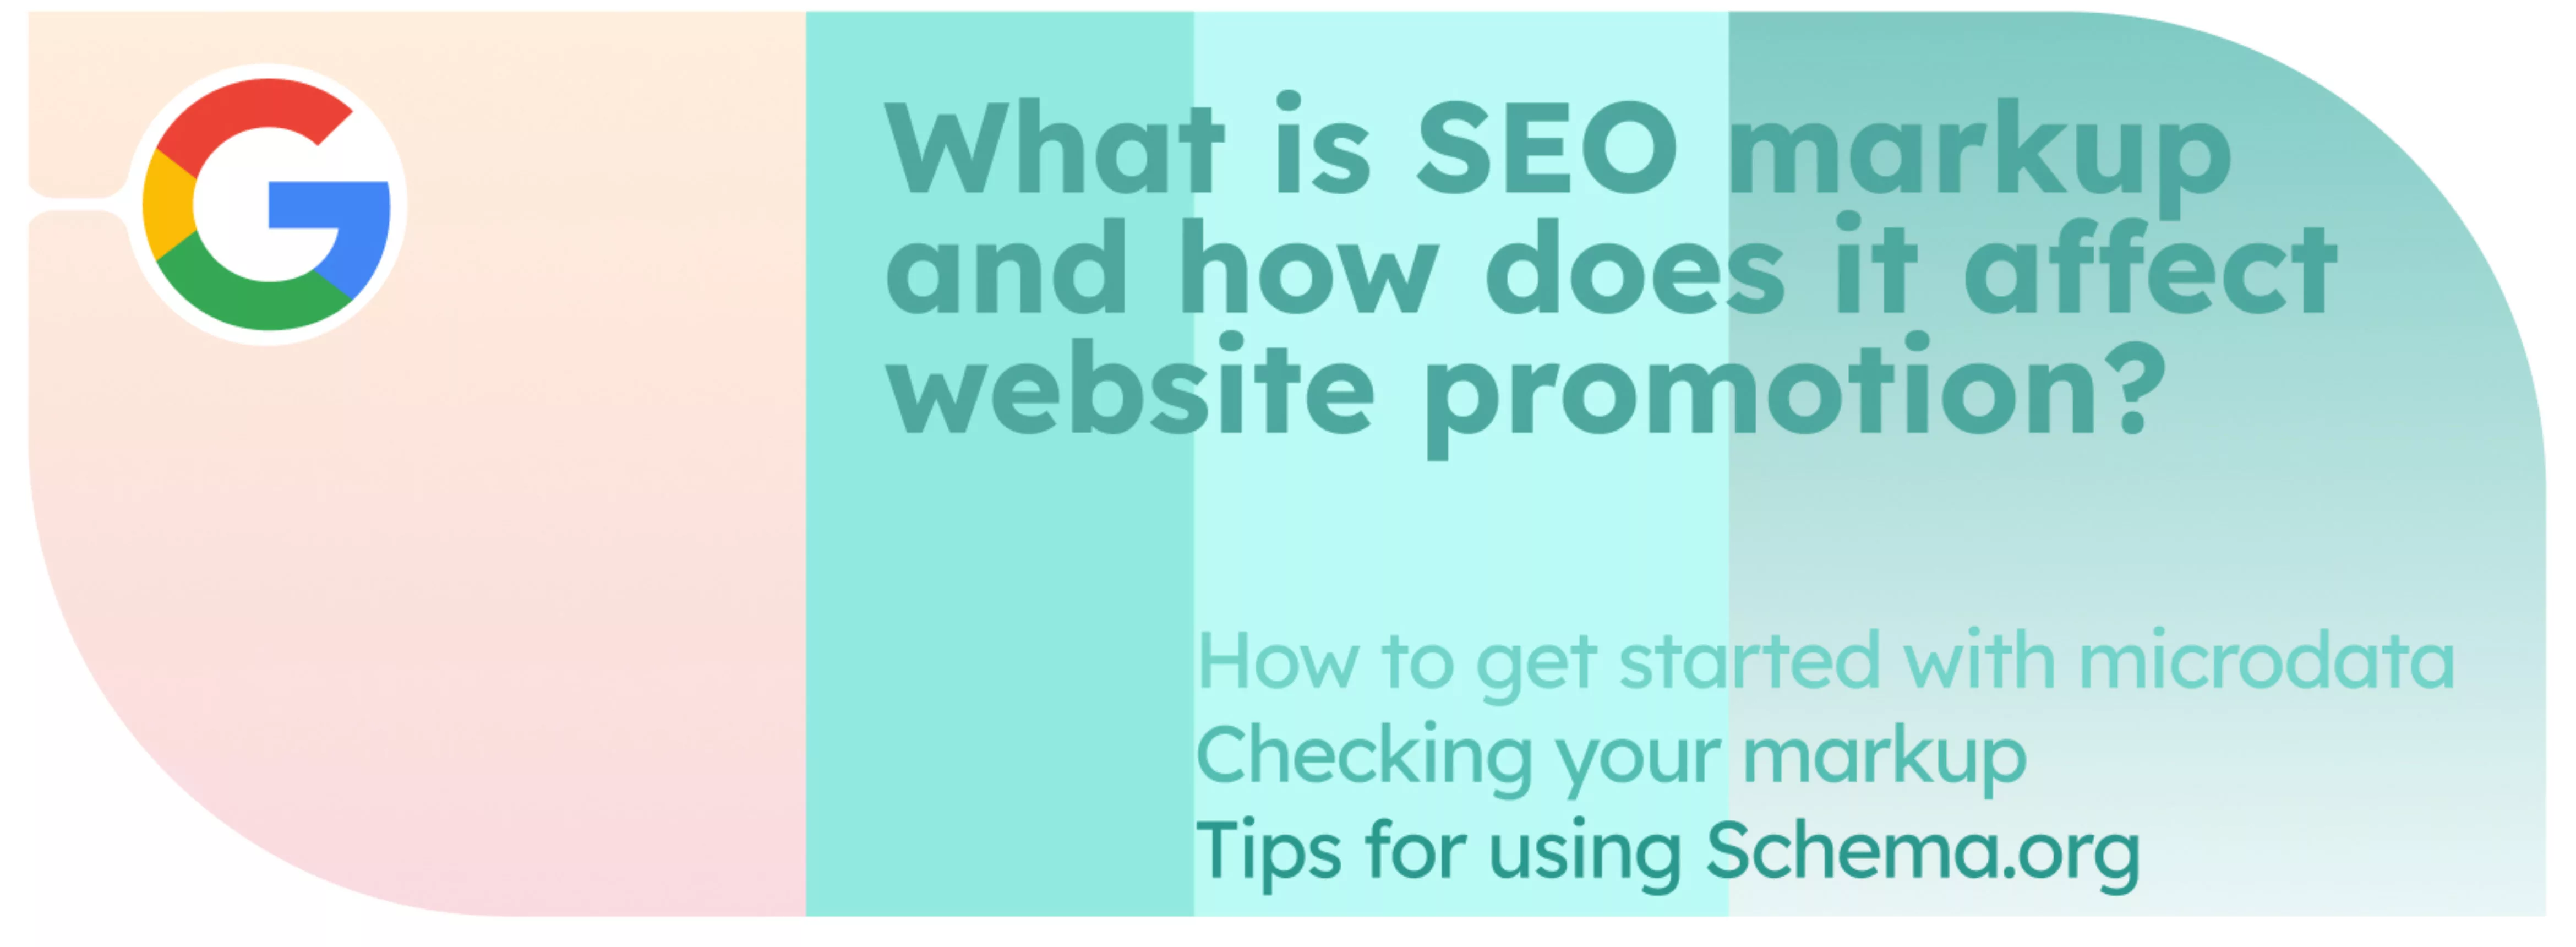 What is SEO markup and how does it affect website promotion?